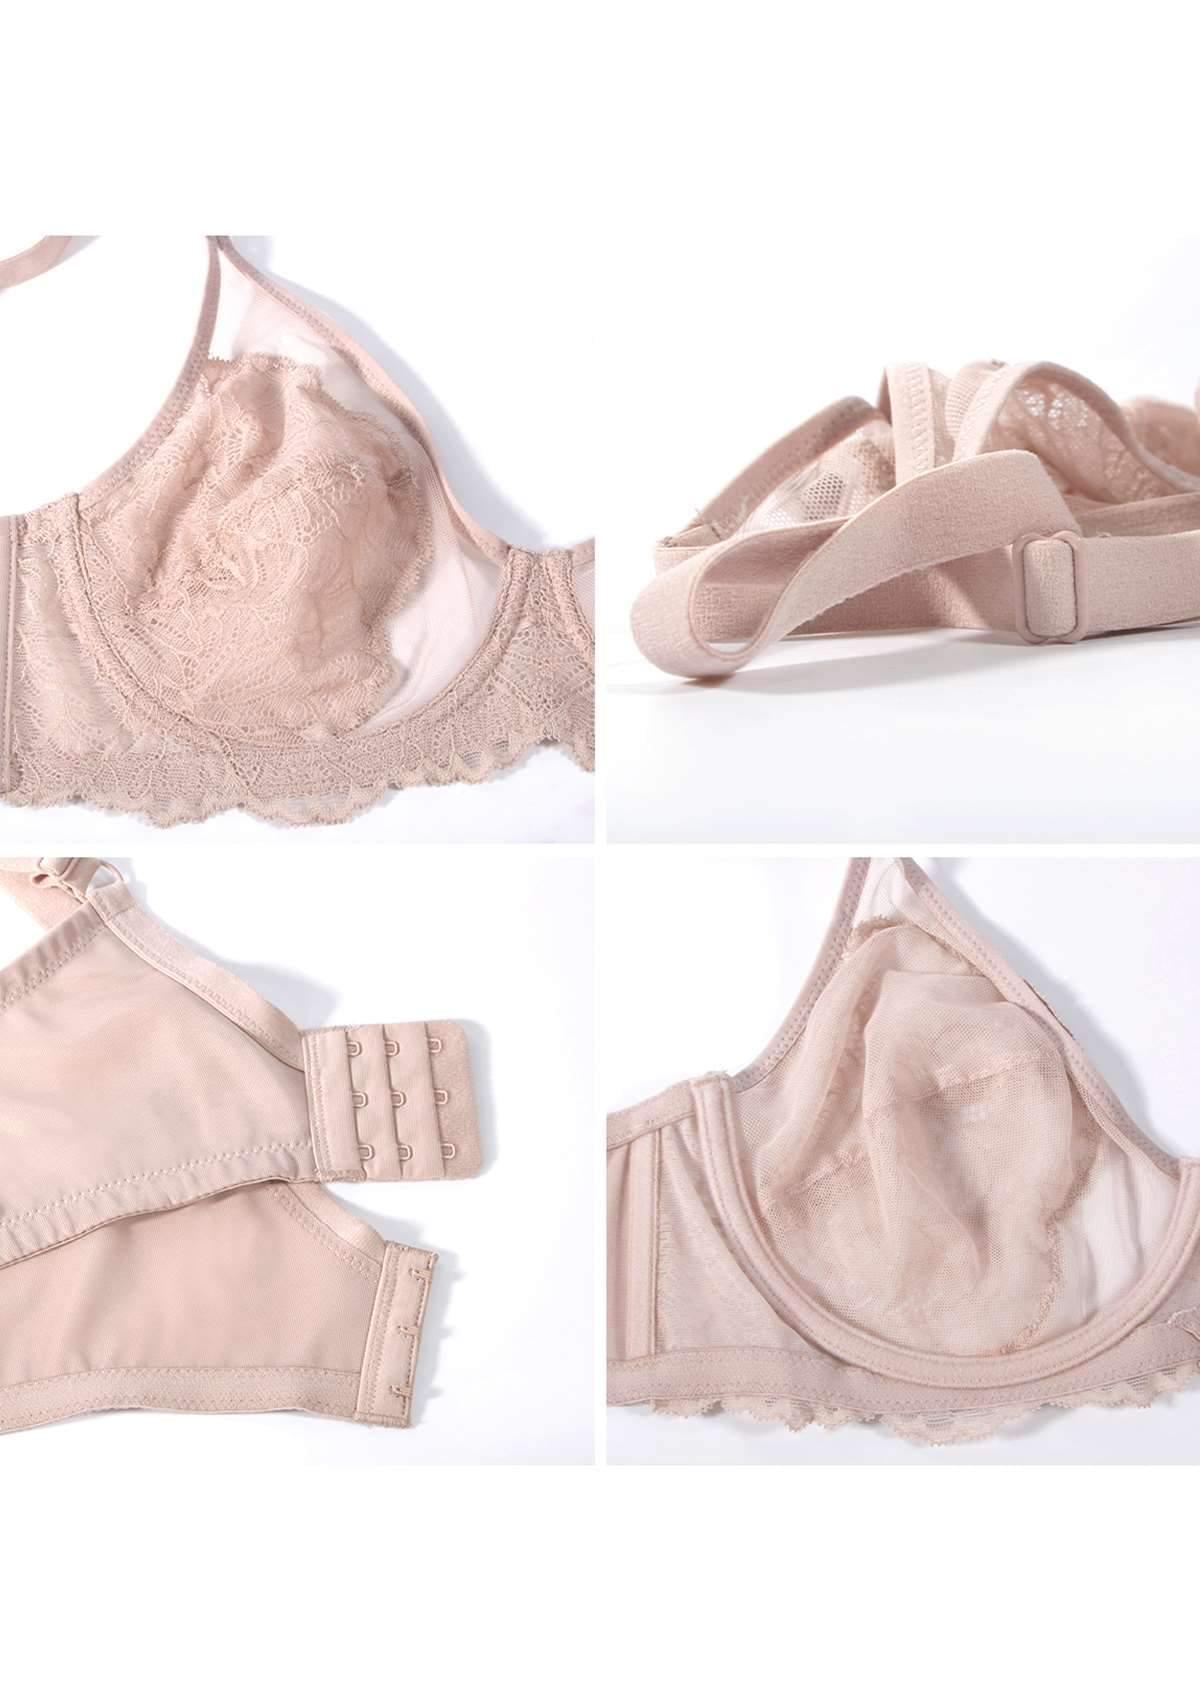 HSIA Blossom Lace Bra And Panties Set: Best Bra For Large Busts - Dark Pink / 34 / DD/E